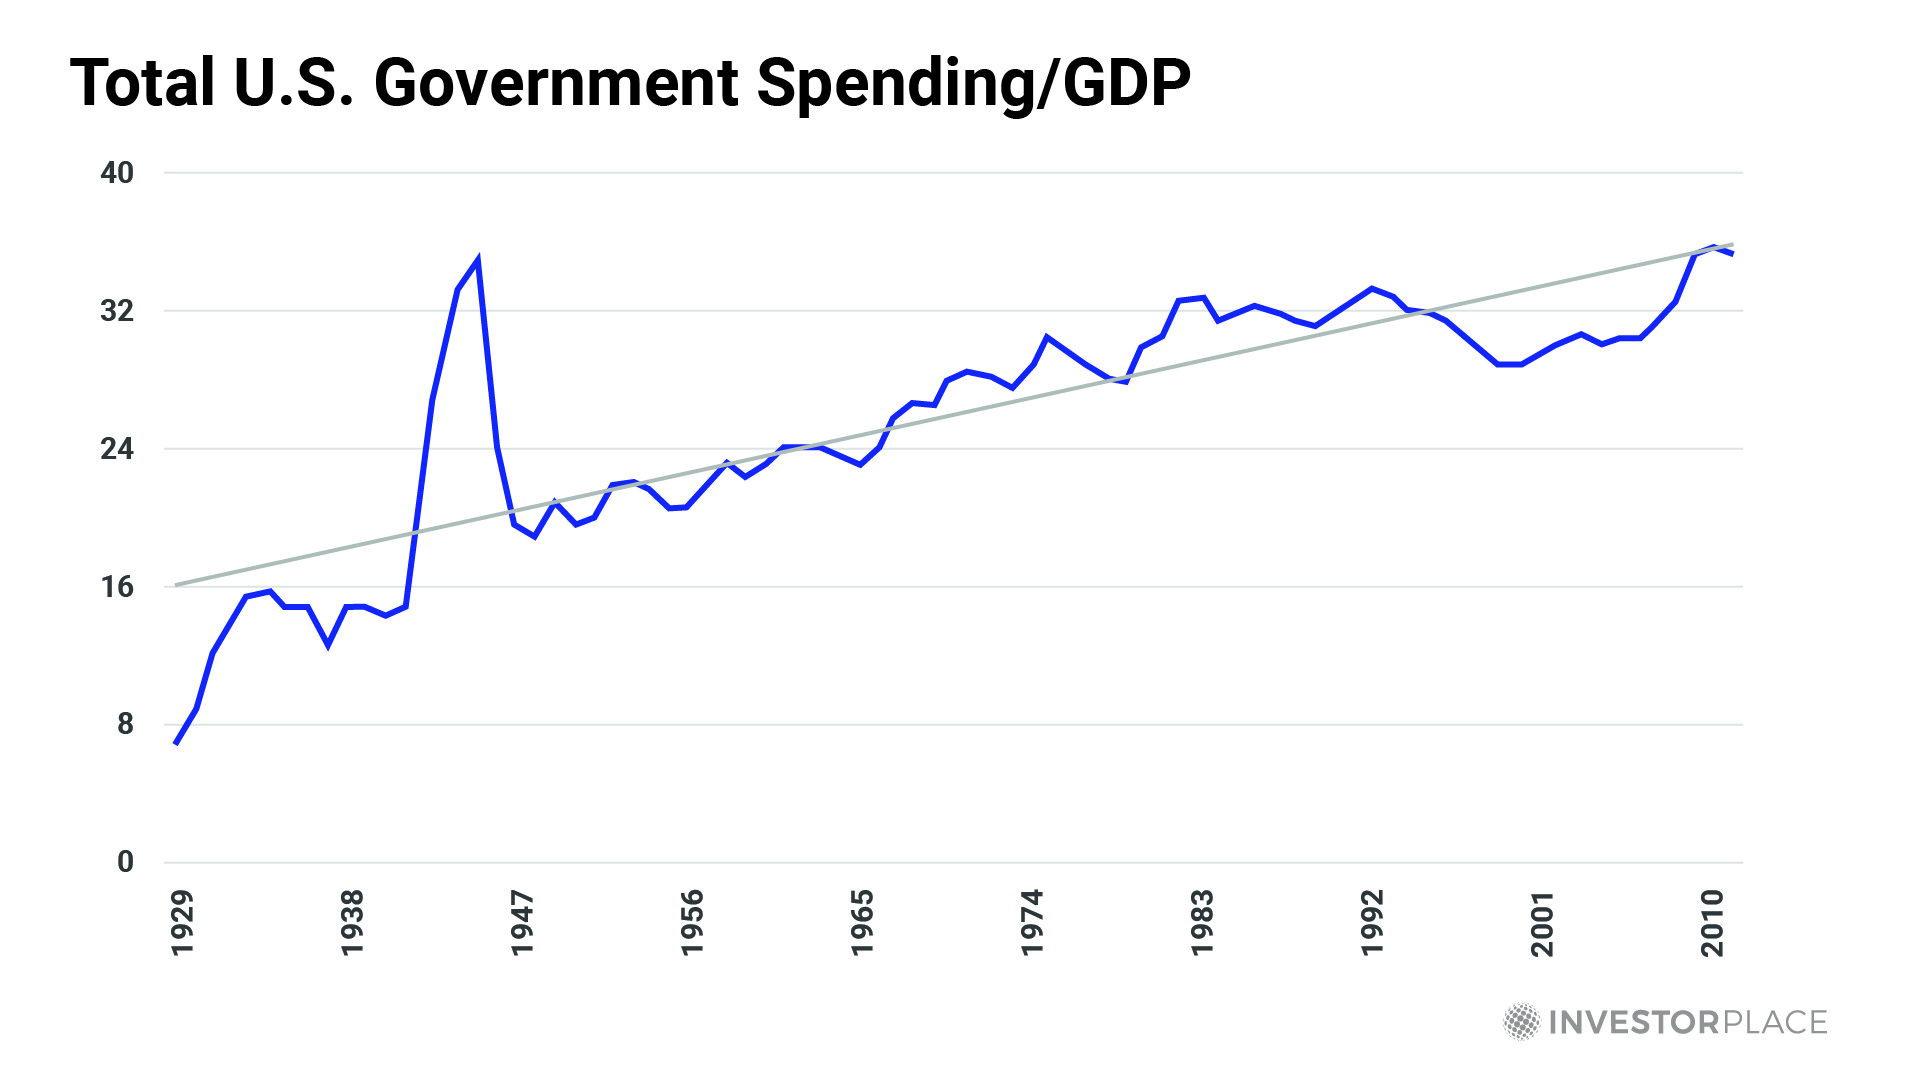 Image of total U.S. government spending versus the GDP